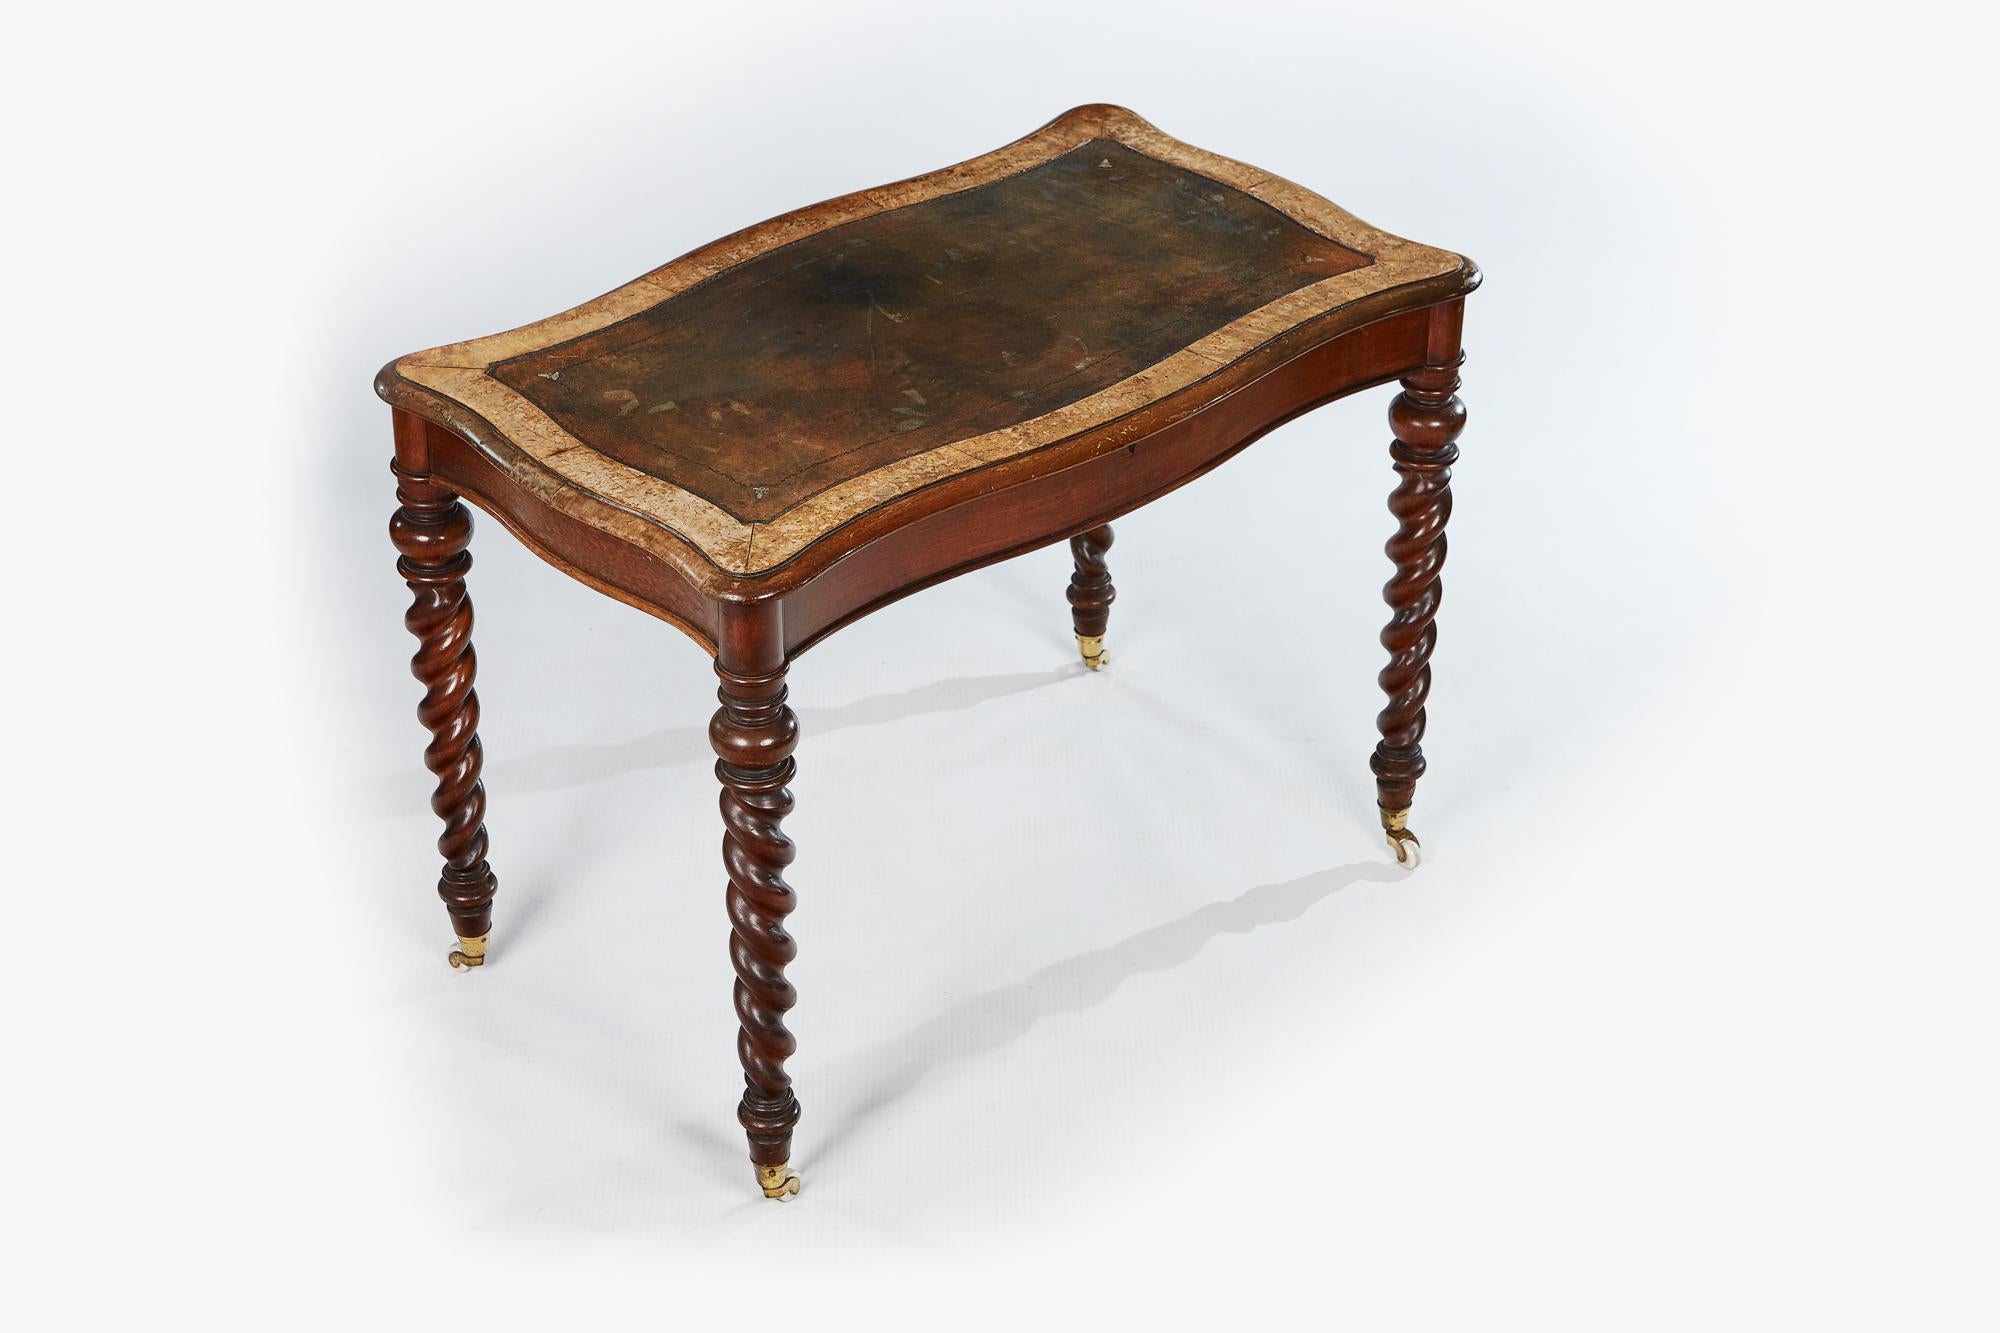 19th century Miles and Edwards writing table of unusual shaped top, with leather scribe on barley twist leg.